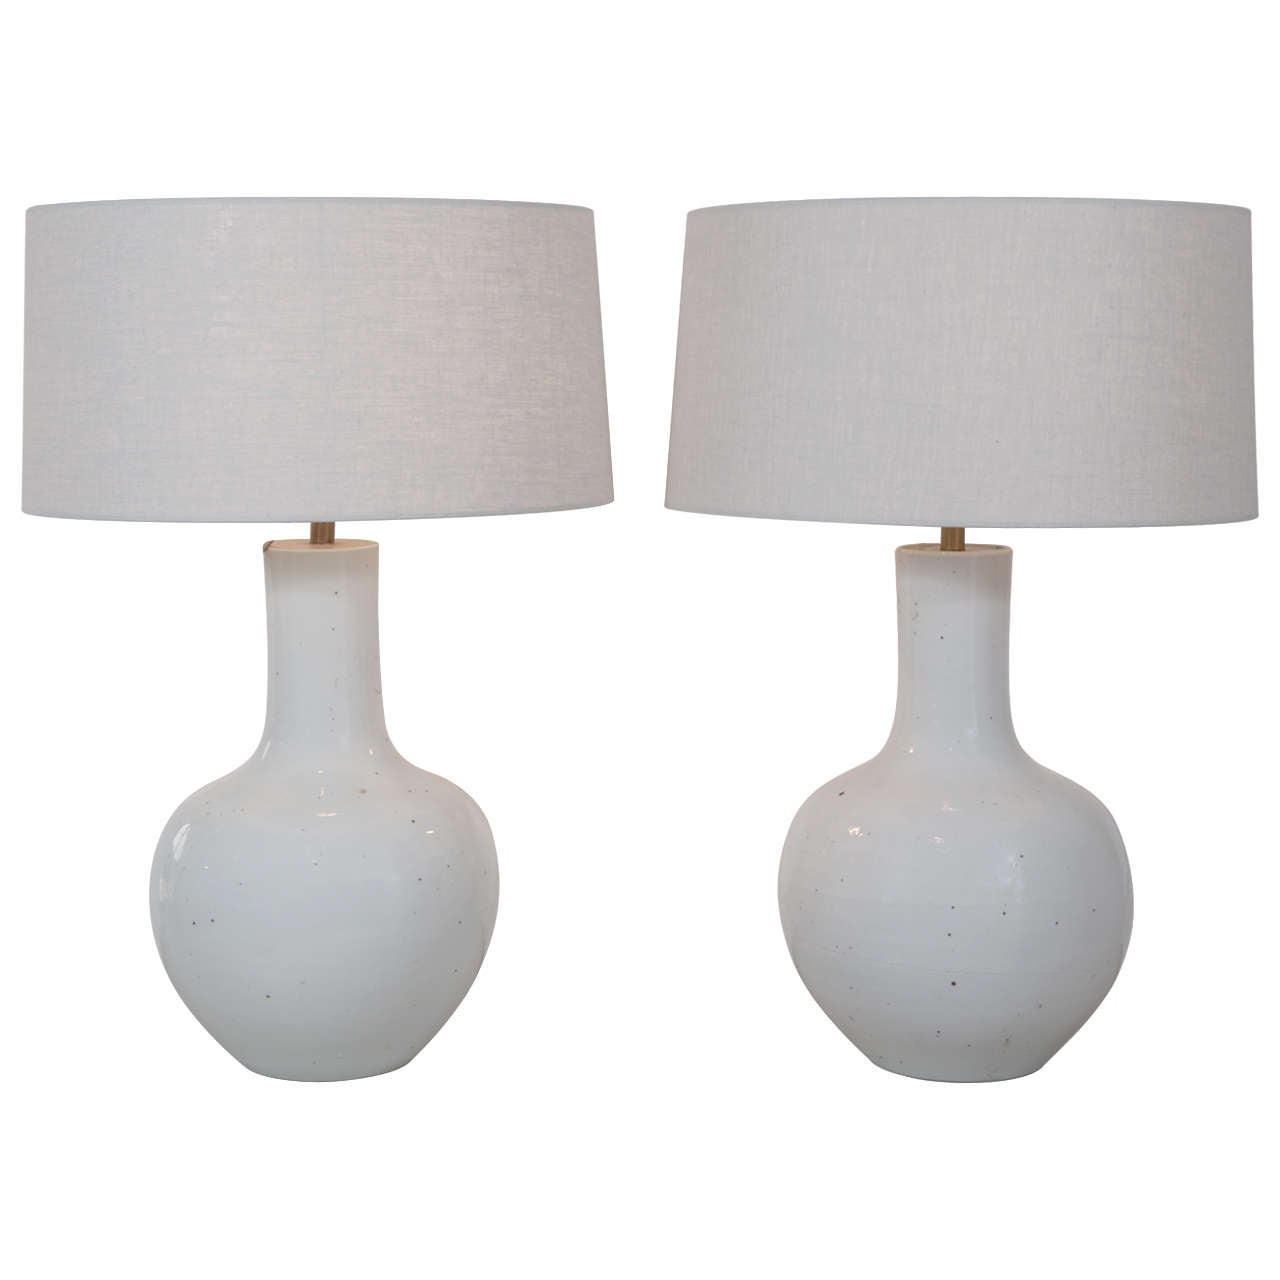 Pair of Vintage Vases as Table Lamps